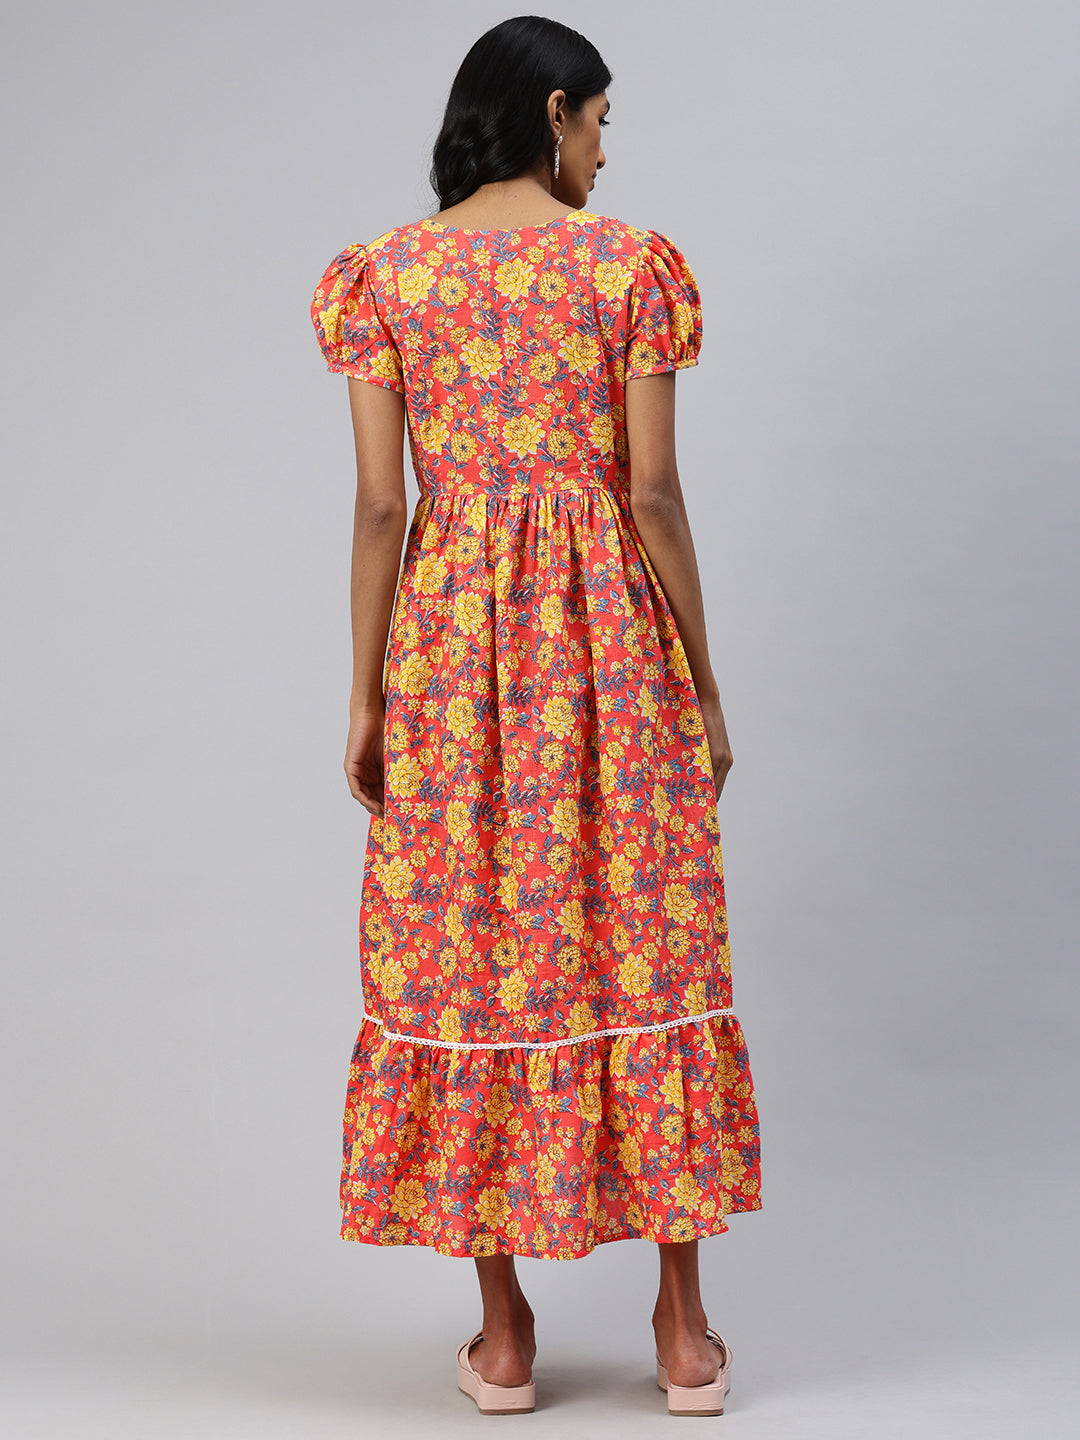 Peach and Yellow Floral Print Puff Sleeves cotton Maternity Fit & Flare Midi Dress